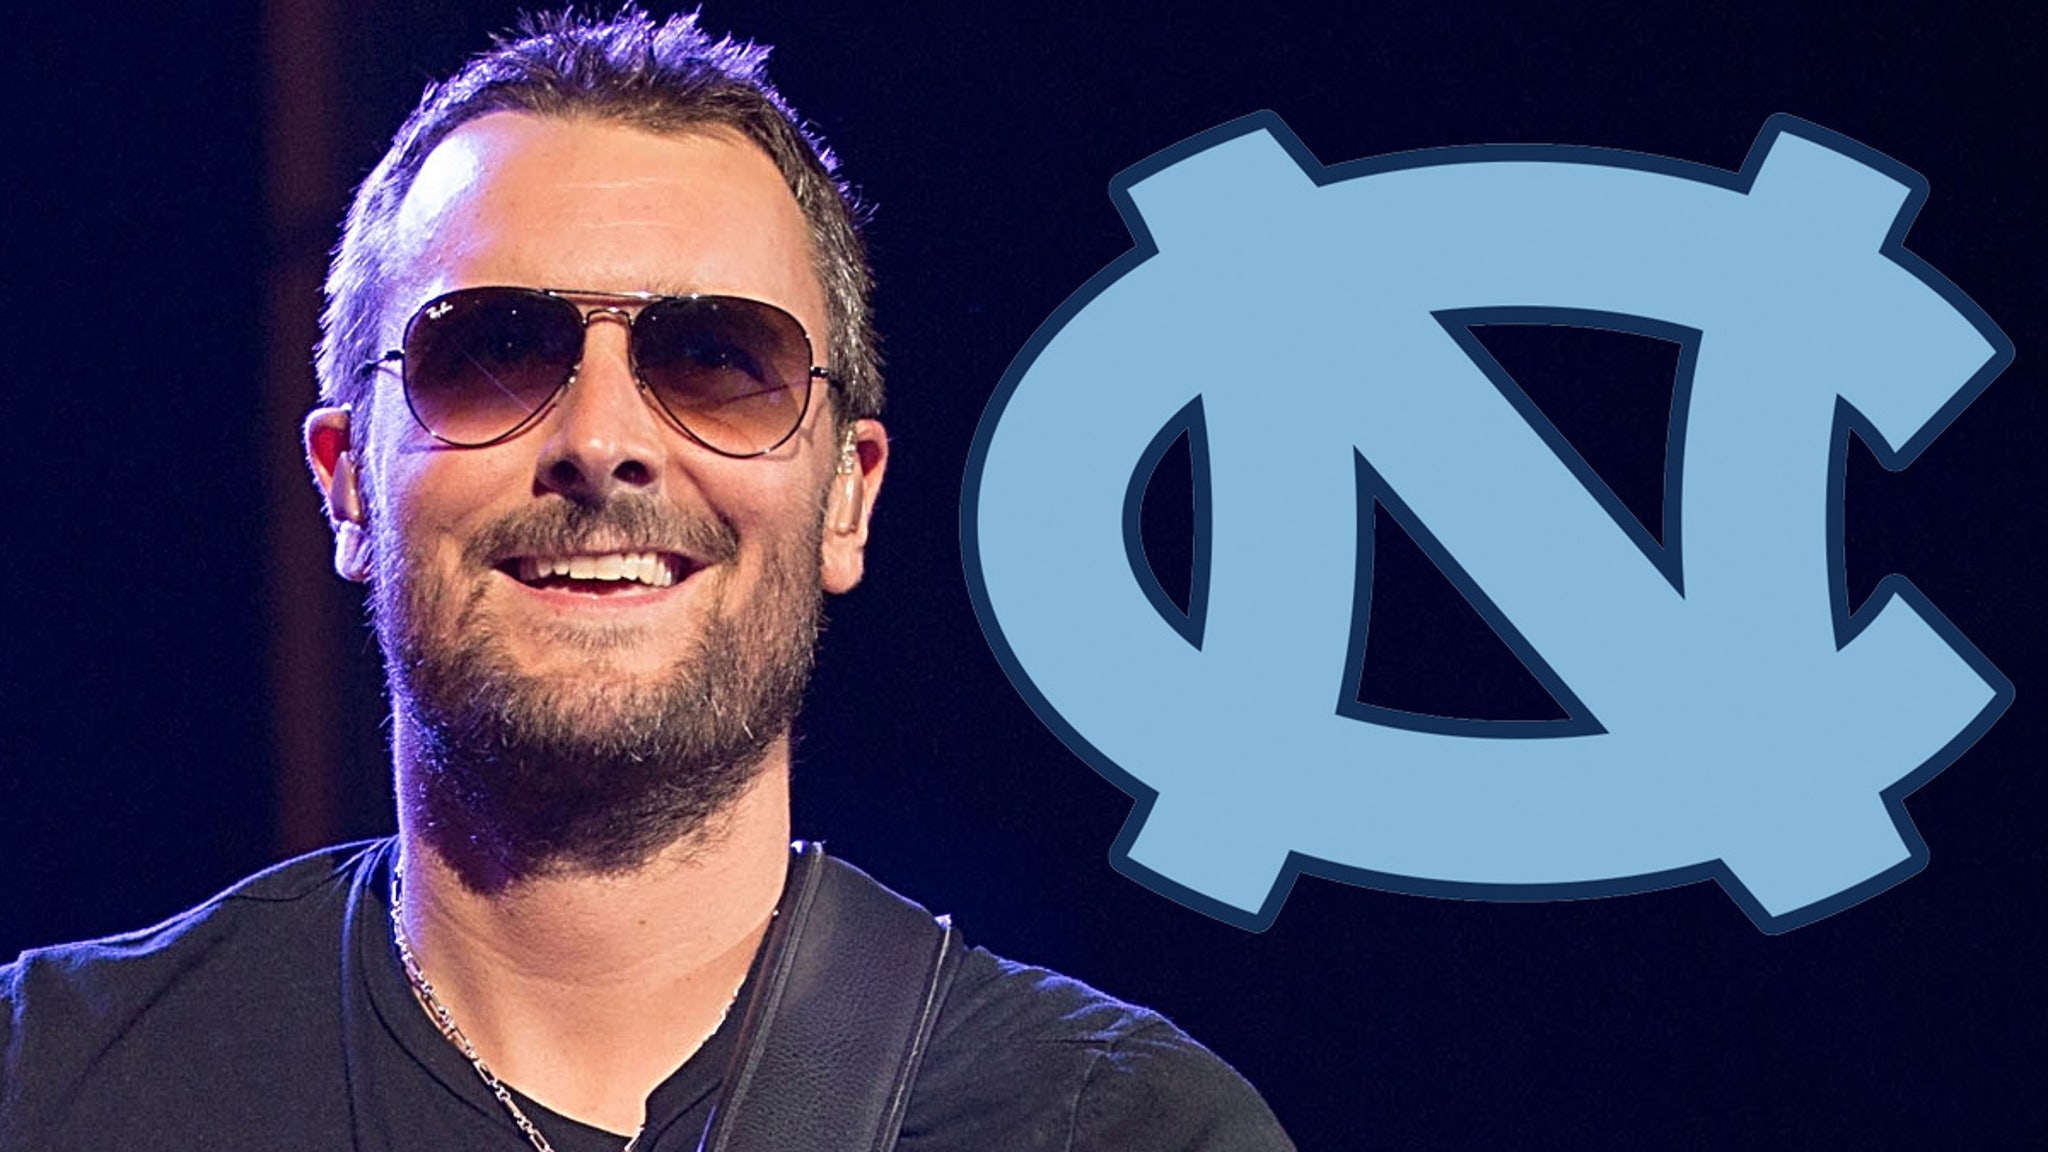 Eric Church offers free concert after cancellation of show for UNC vs.  Duke games